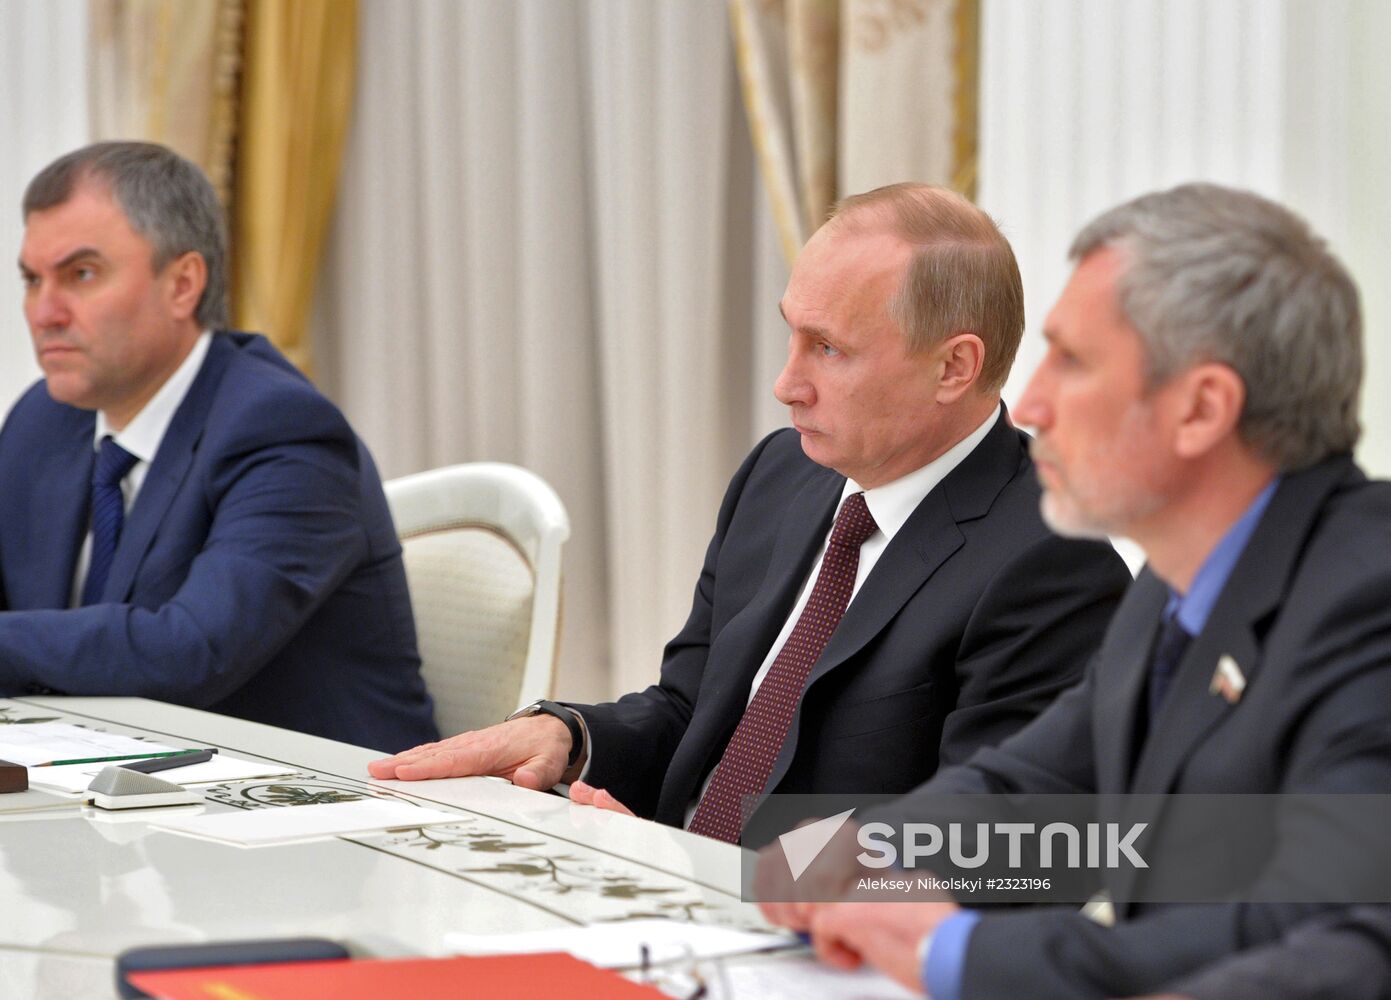 Vladimir Putin meets with leaders of non-parliamentary parties